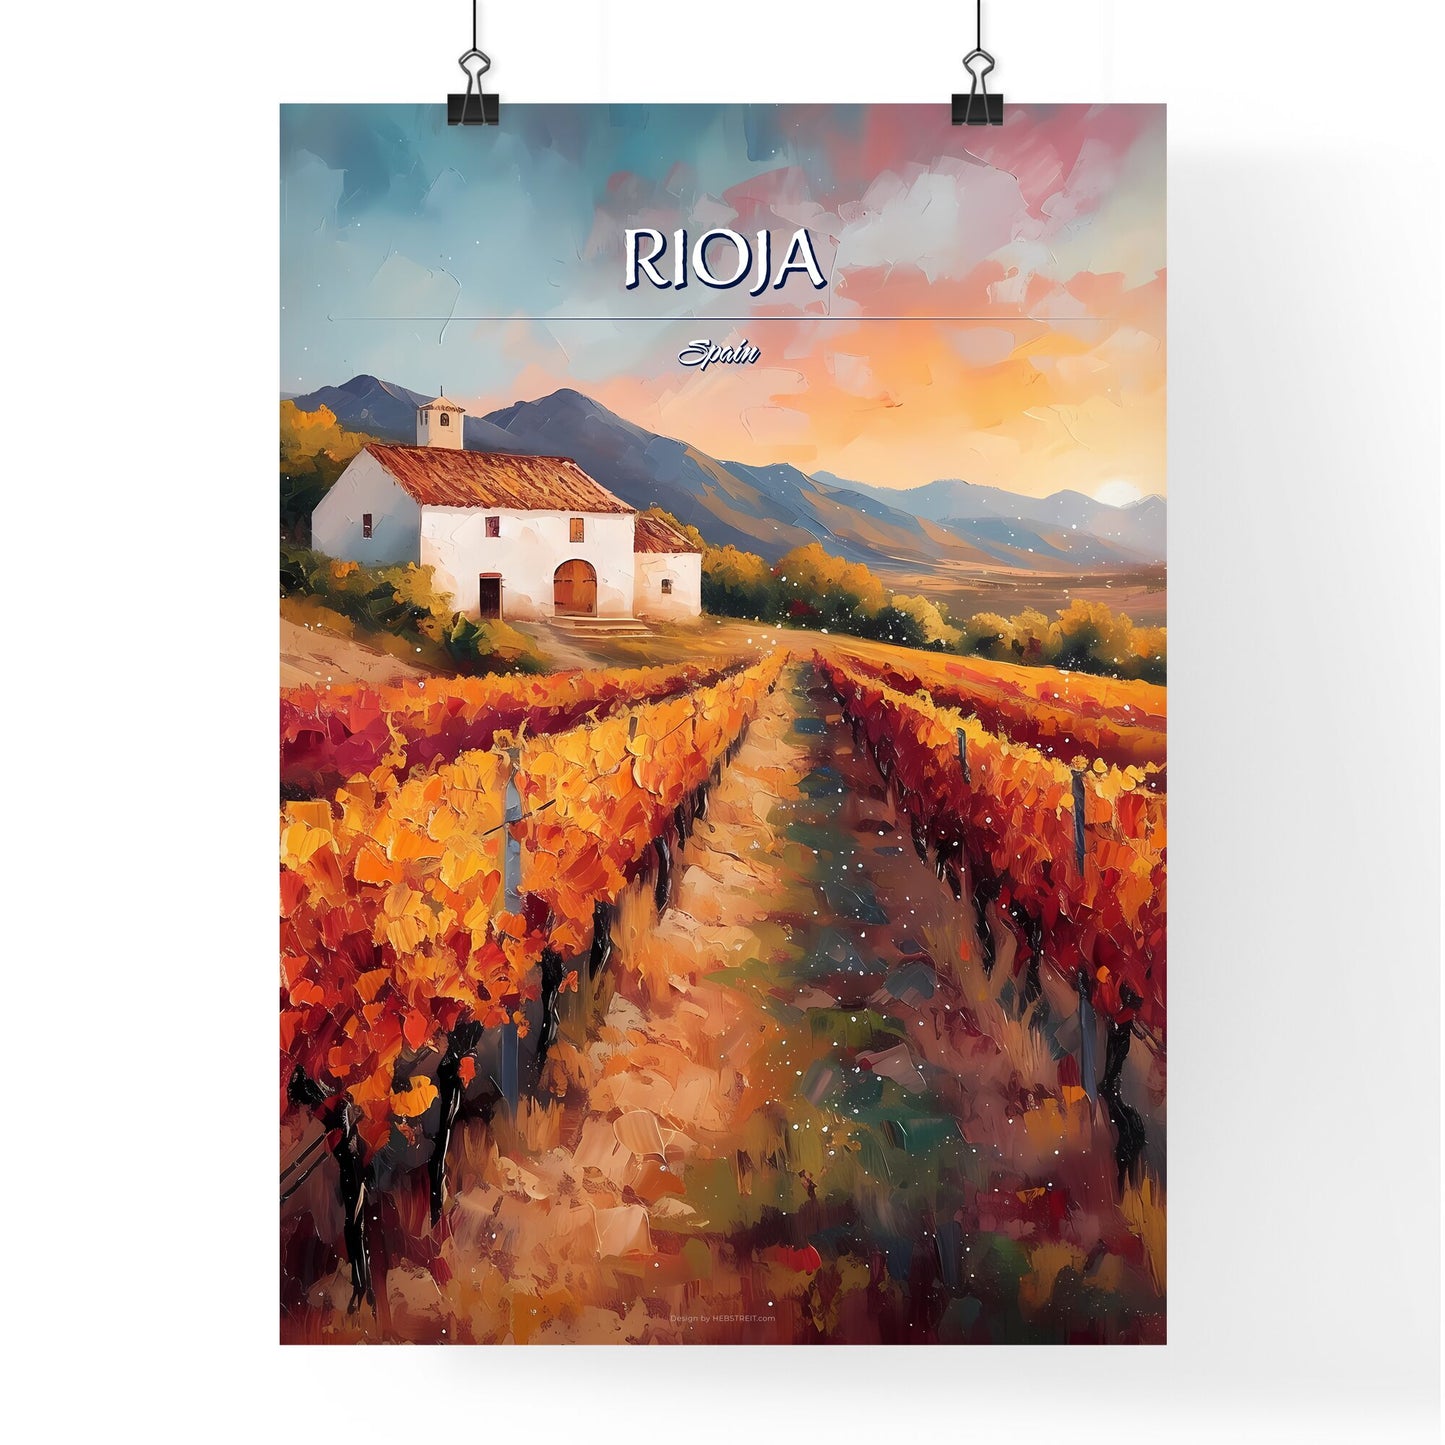 Rioja, Spain - Art print of a painting of a vineyard with a house in the background Default Title